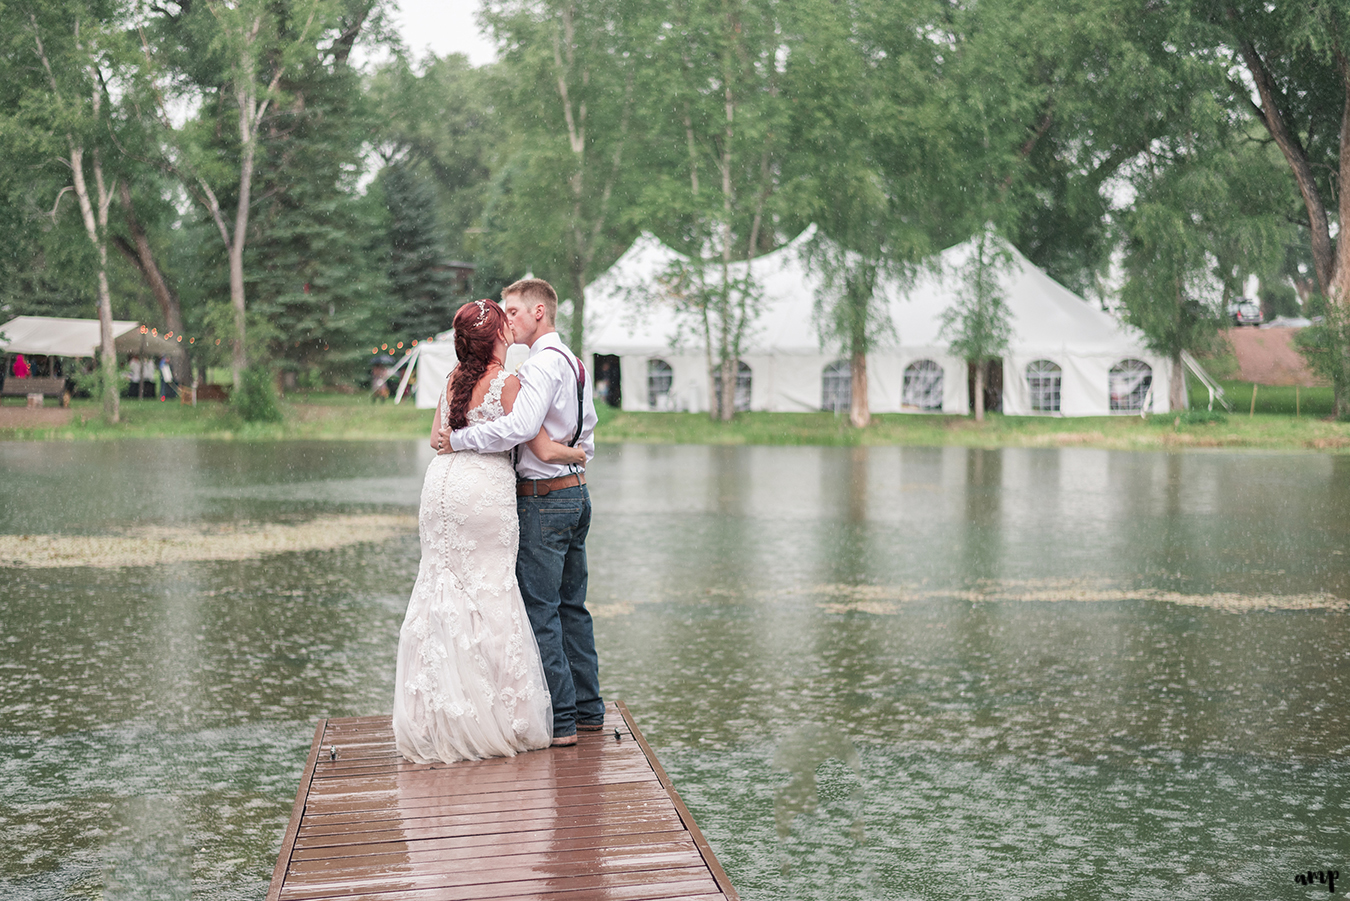 Bride and groom kissing on the dock of a pond with wedding in background